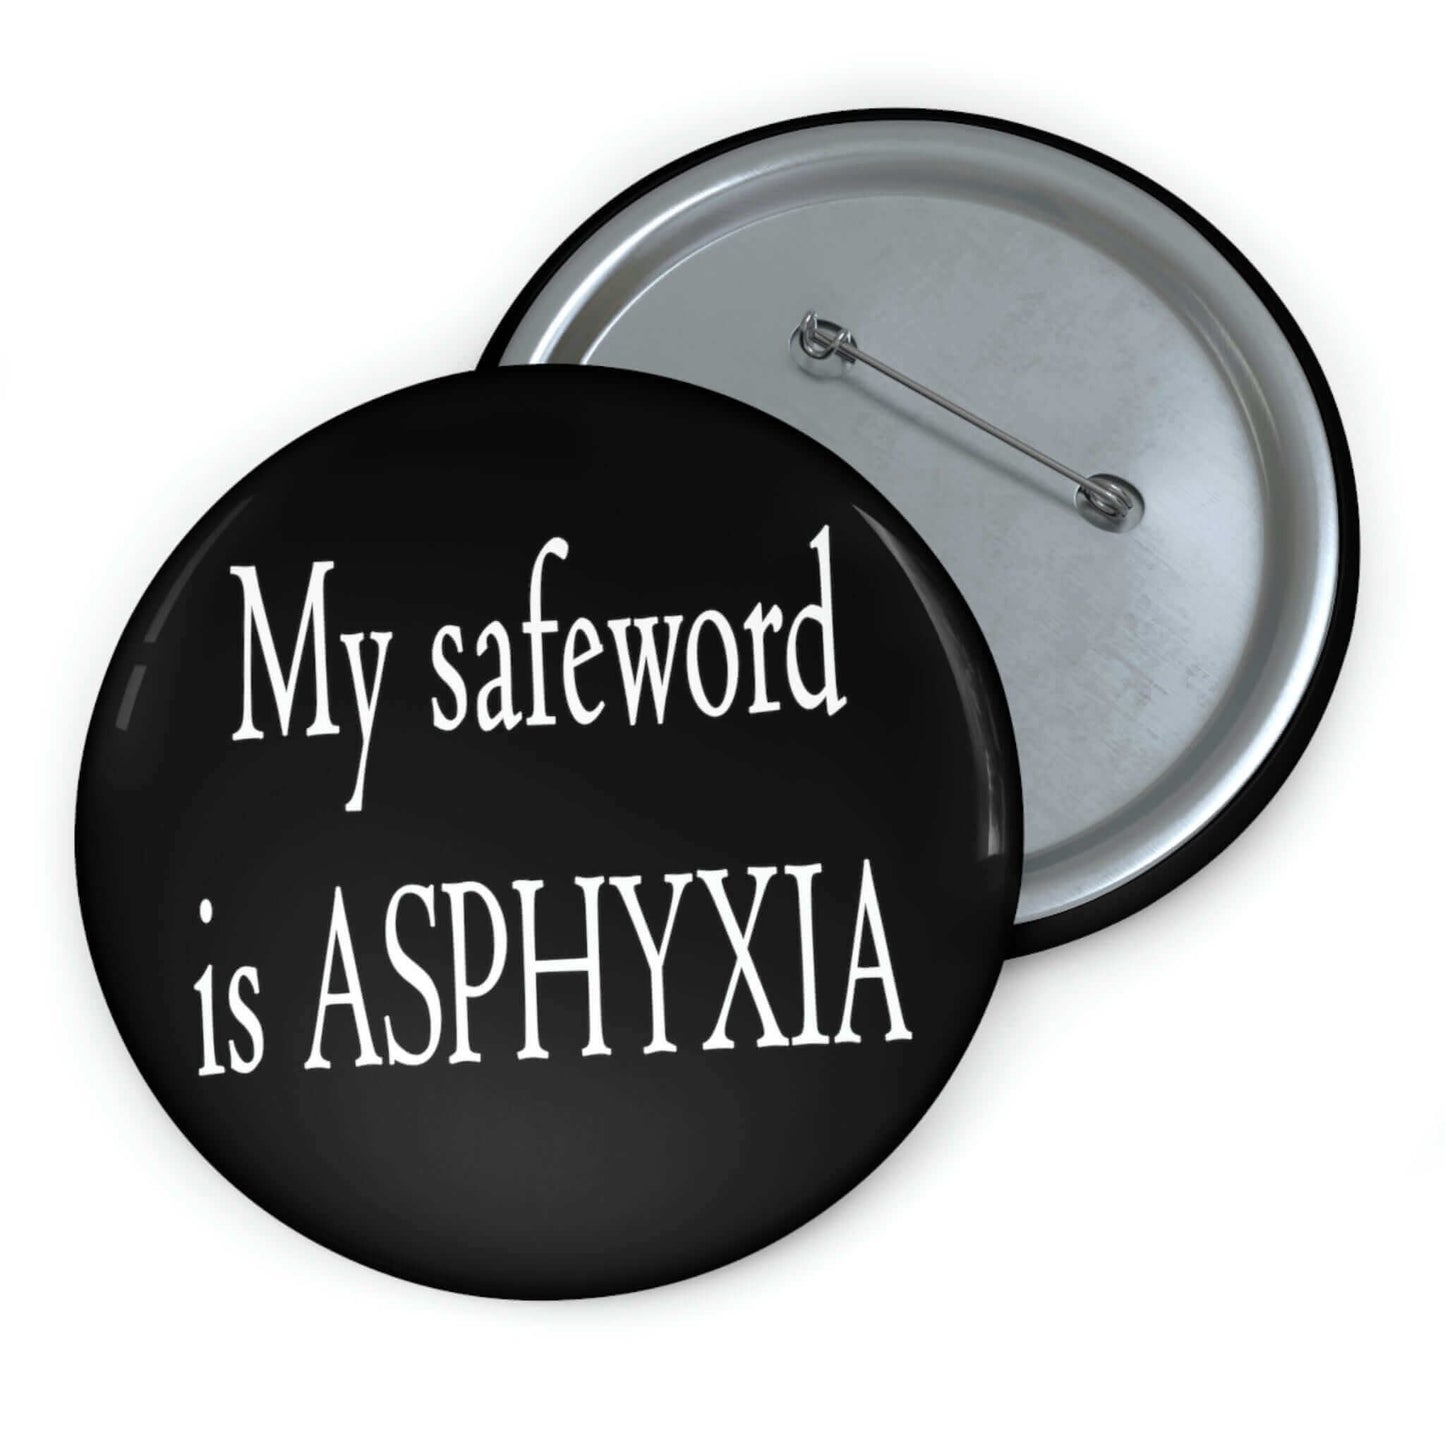 My safeword is asphyxia pinback button